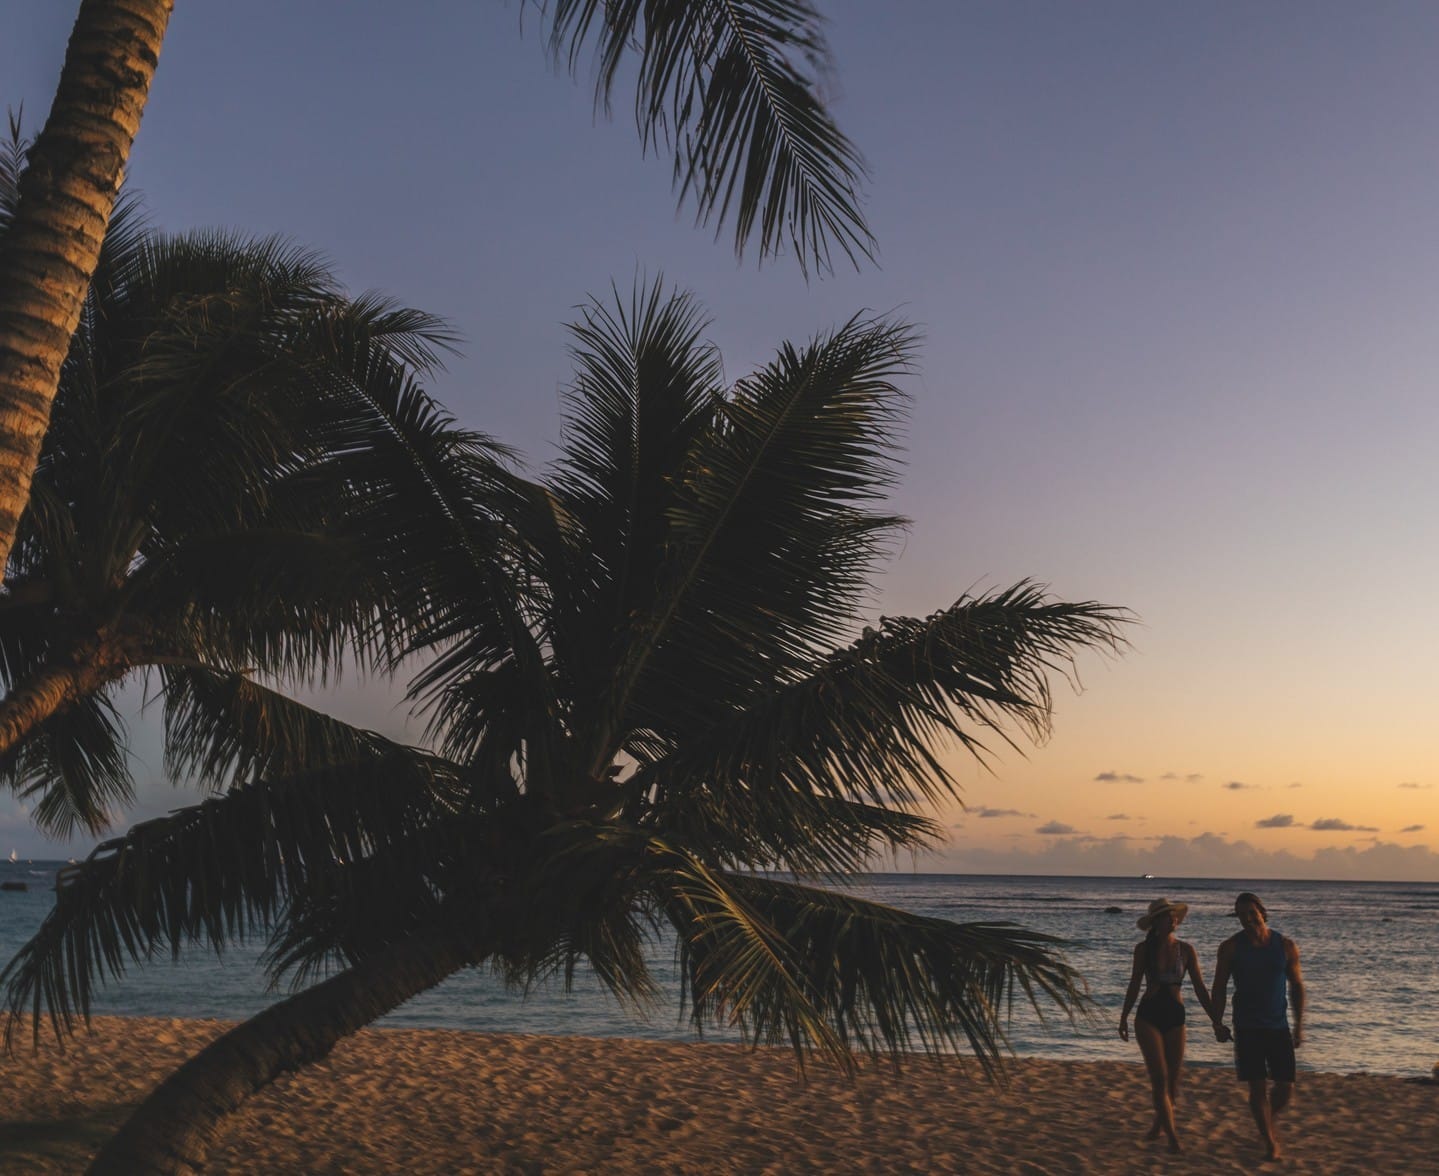 It's National Beach Day! Get outside and enjoy nearby Ala Moana Beach Park. With more than half a mile of white sand beach, this seaside destination is your spot for leisure and recreation.